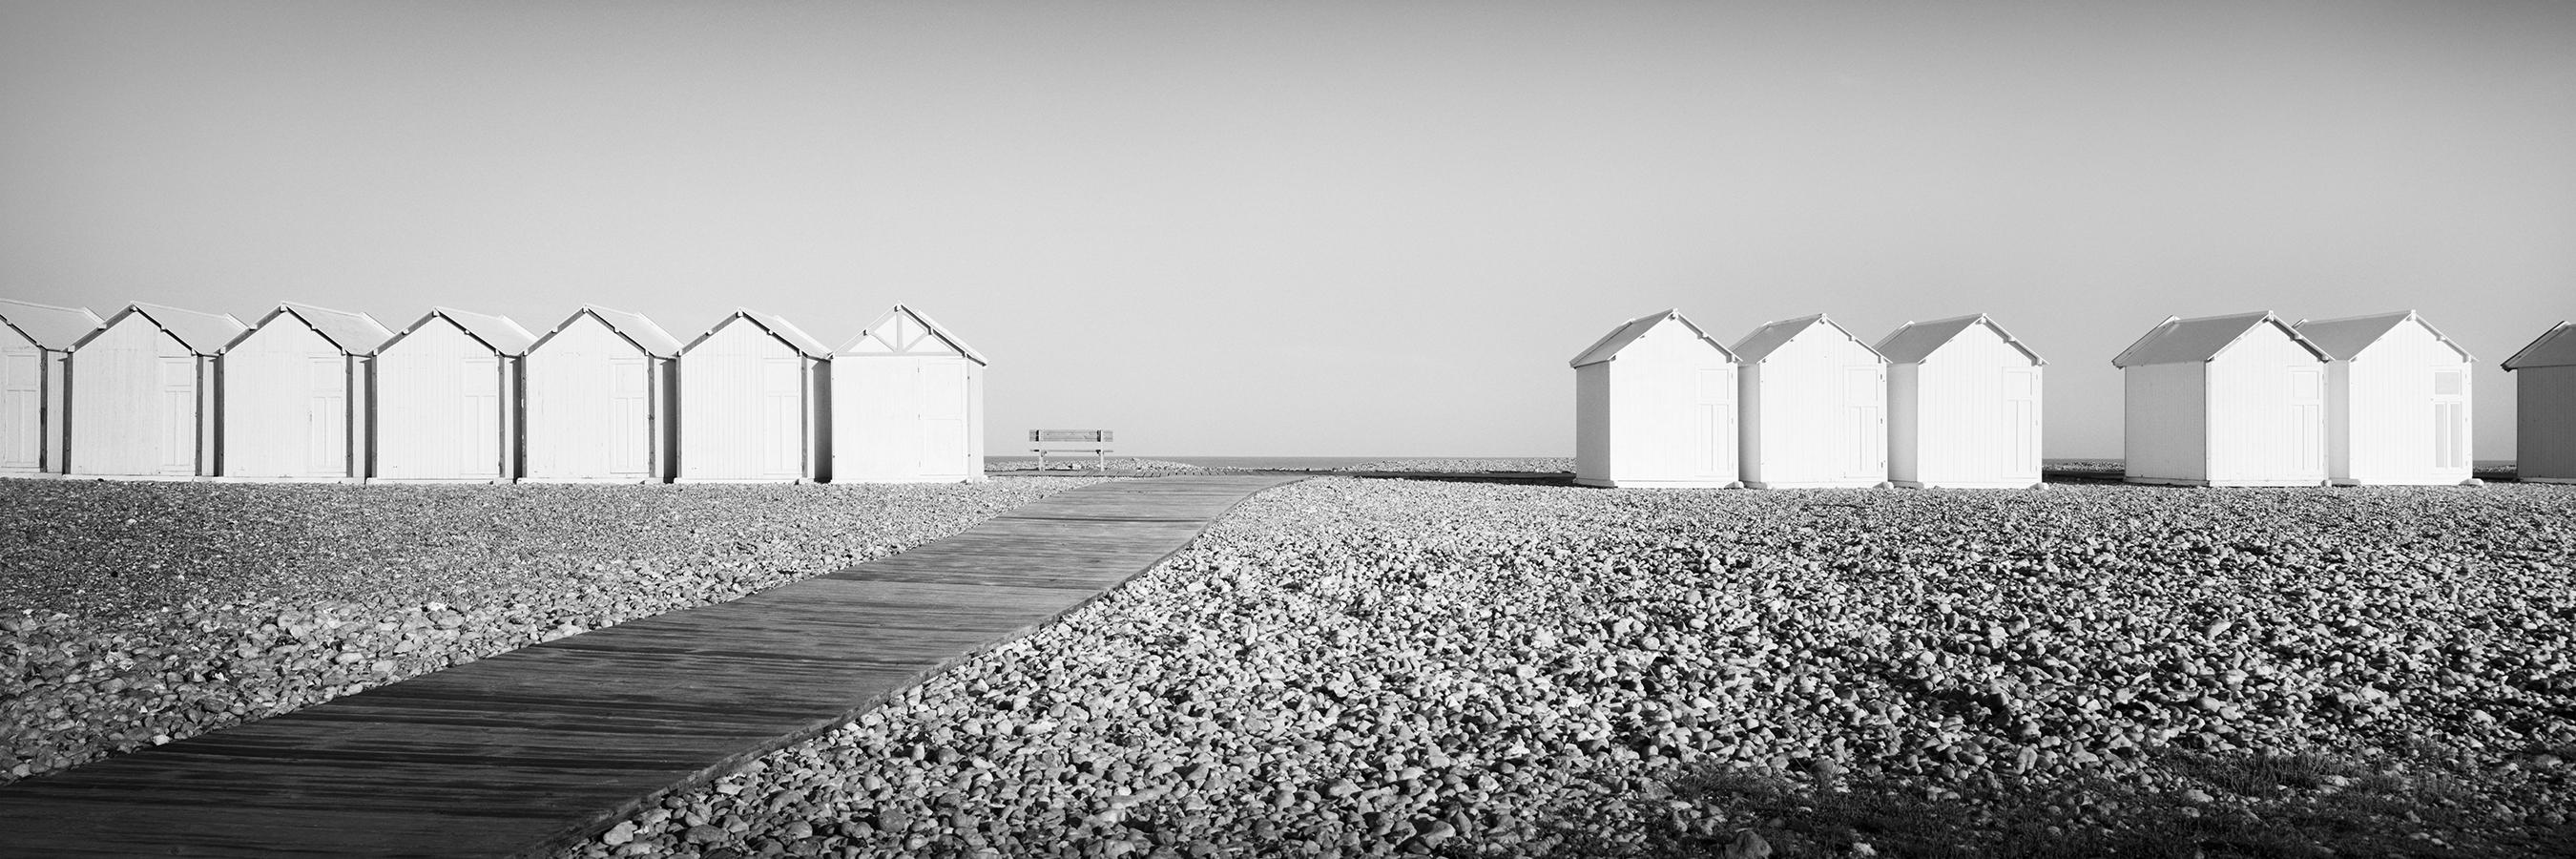 Gerald Berghammer Landscape Photograph - Beach Huts Panorama, bench, stones, France, black & white landscape photography